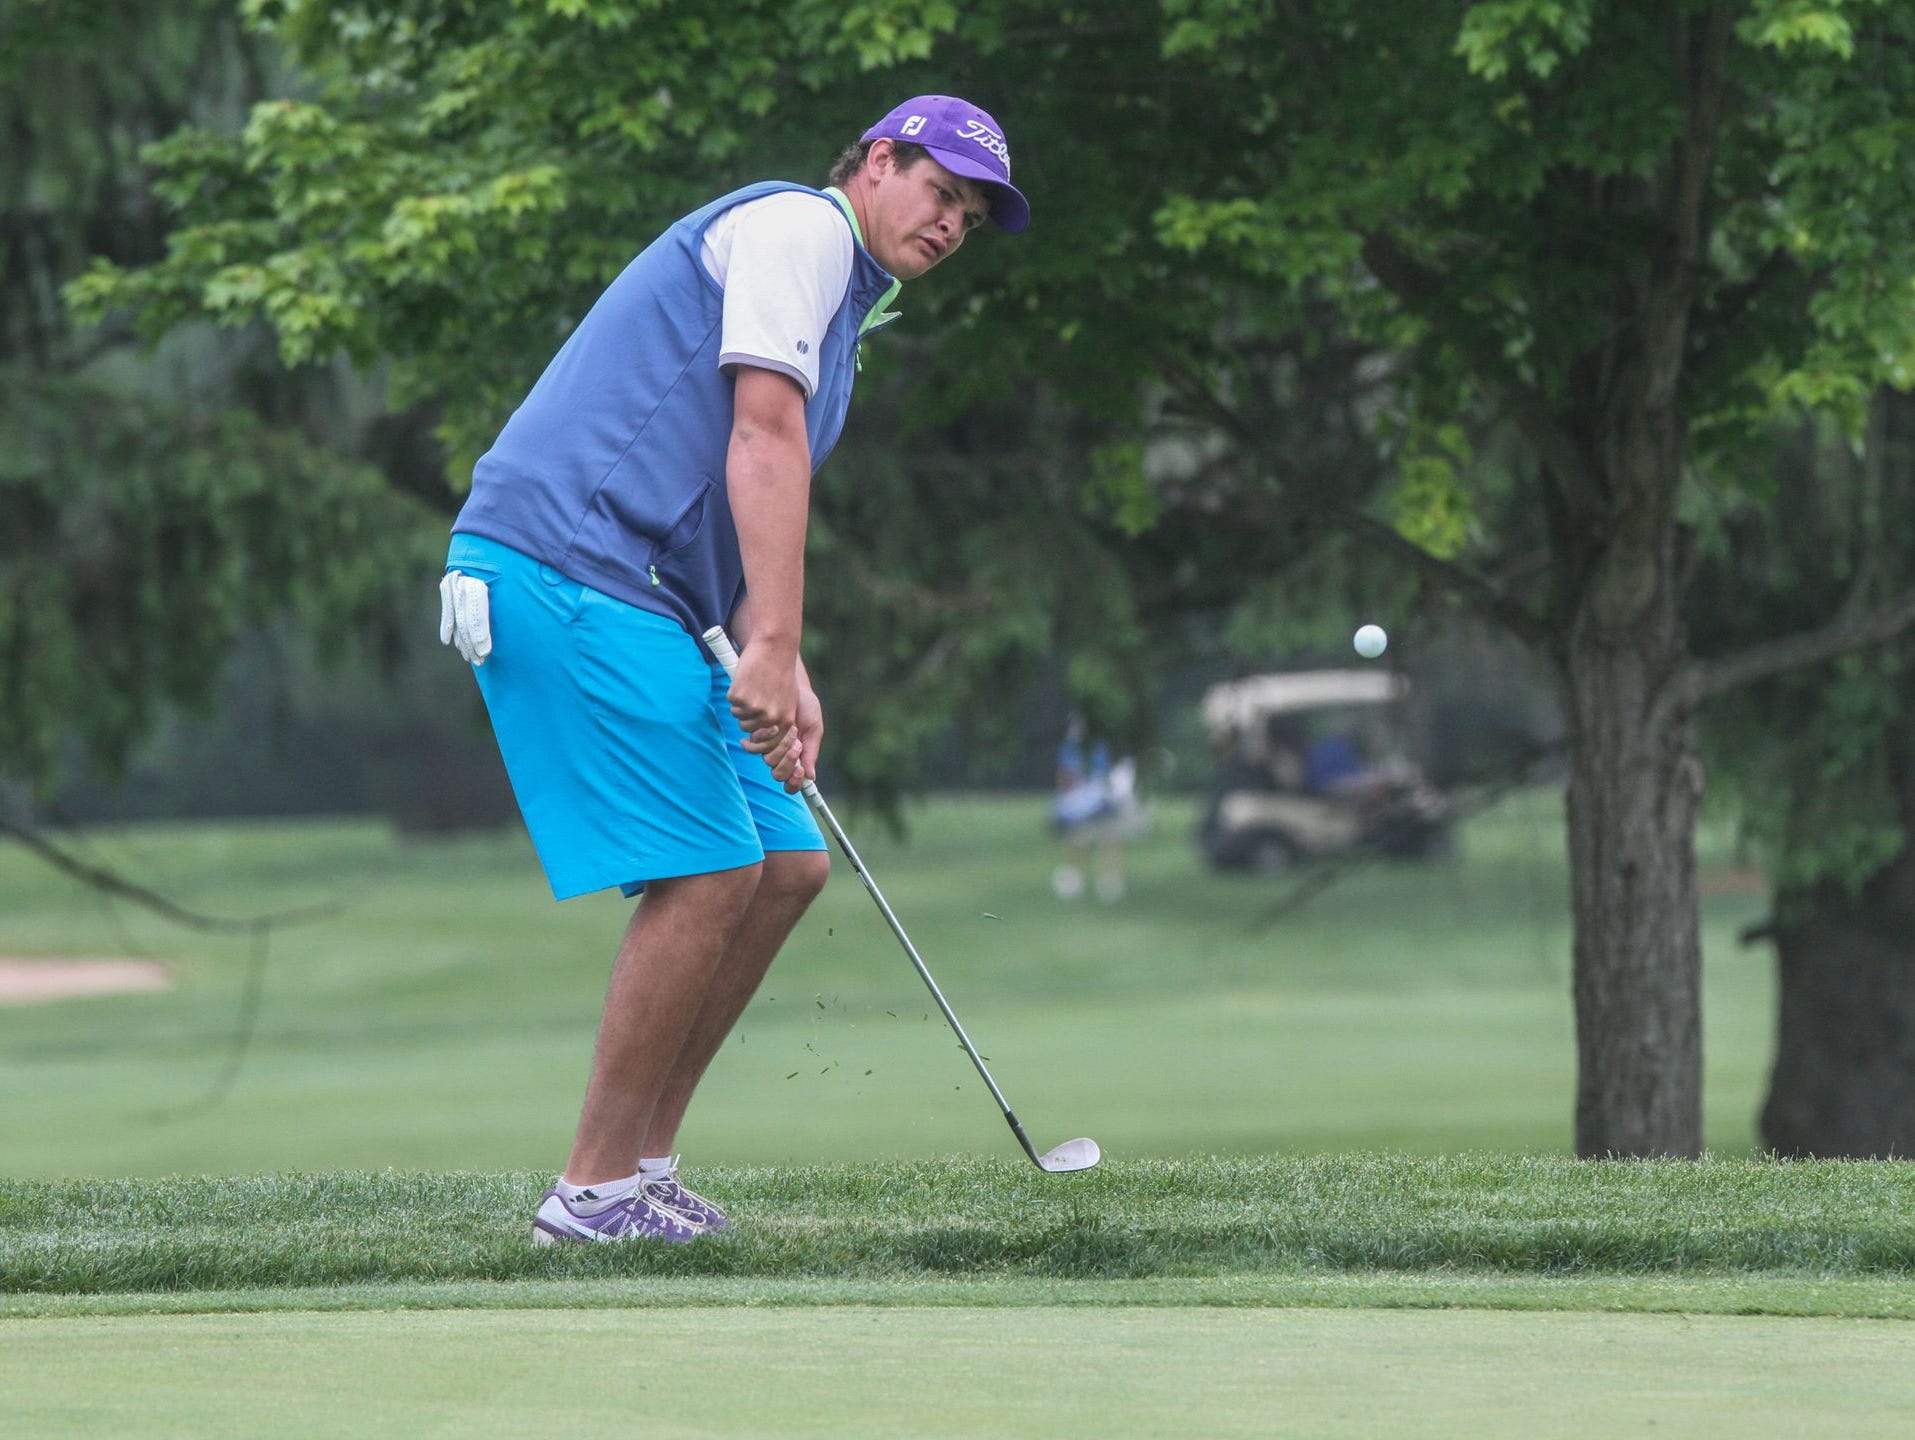 Hopewell, NJ NJSIAA Tournament of Champions high school golf at the Hopewell Valley County Club. Reid Bedell of Rumson-Fair Haven. 051815